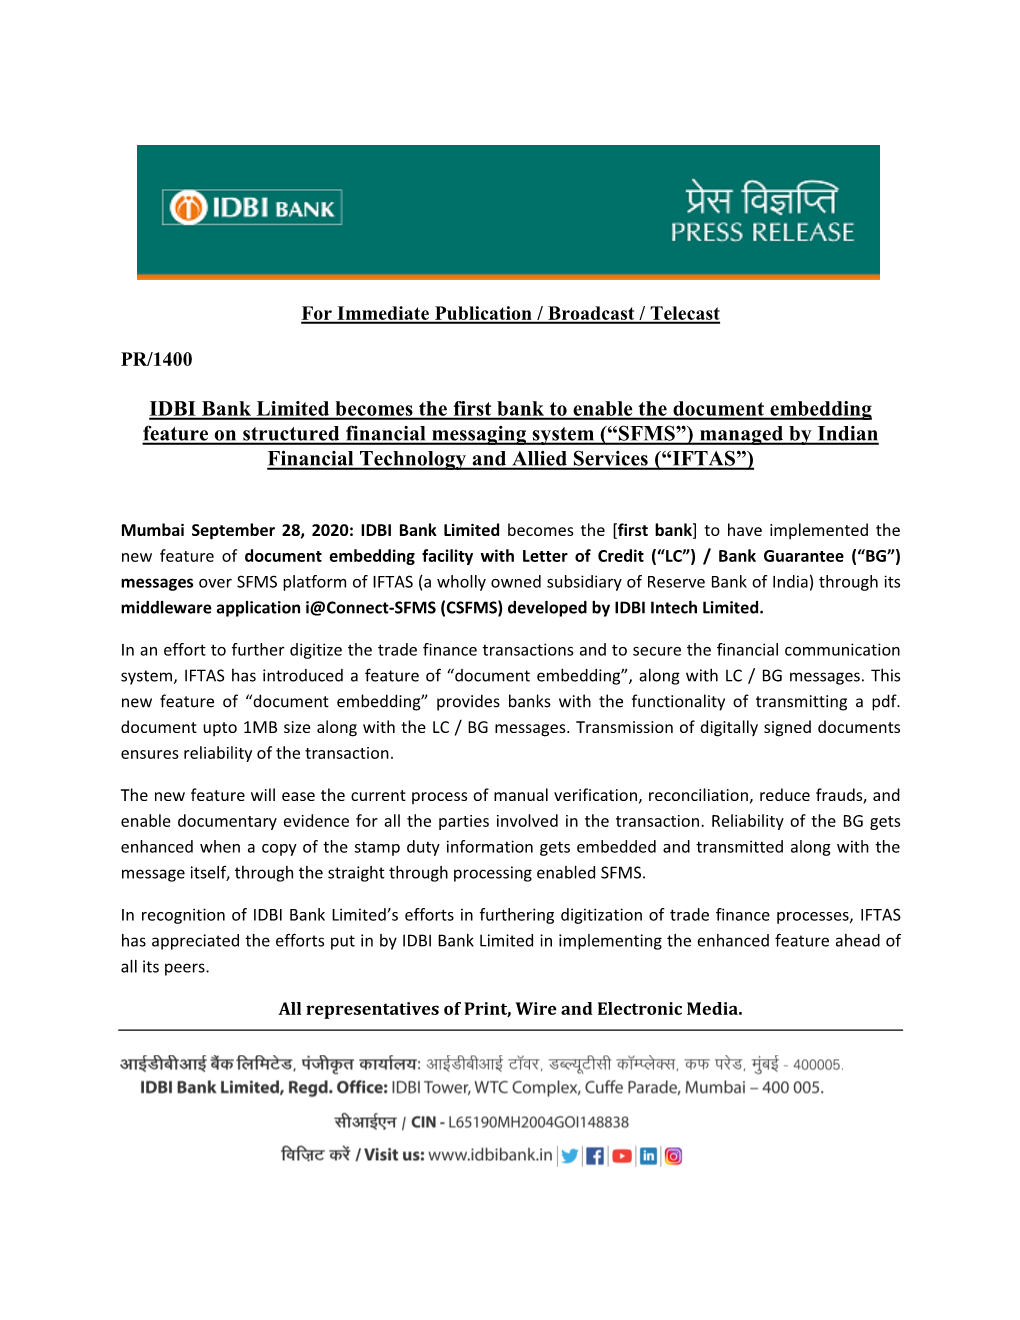 IDBI Bank Limited Becomes the First Bank to Enable the Document